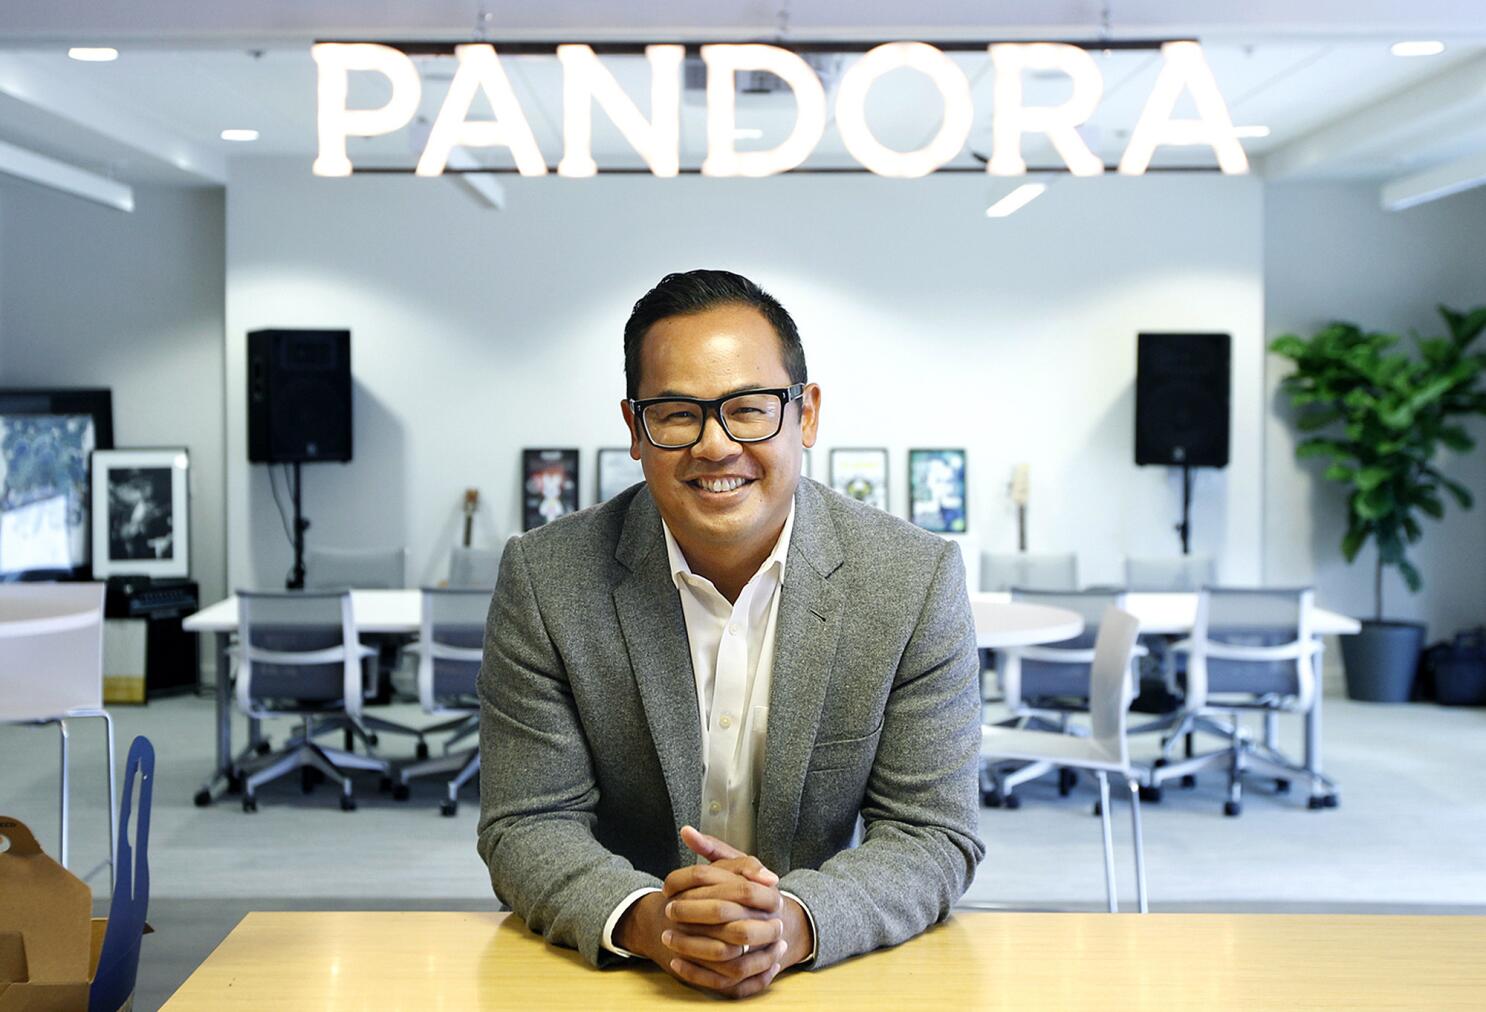 Los Angeles Event Industry News From Sephora, Pandora, the Emmy